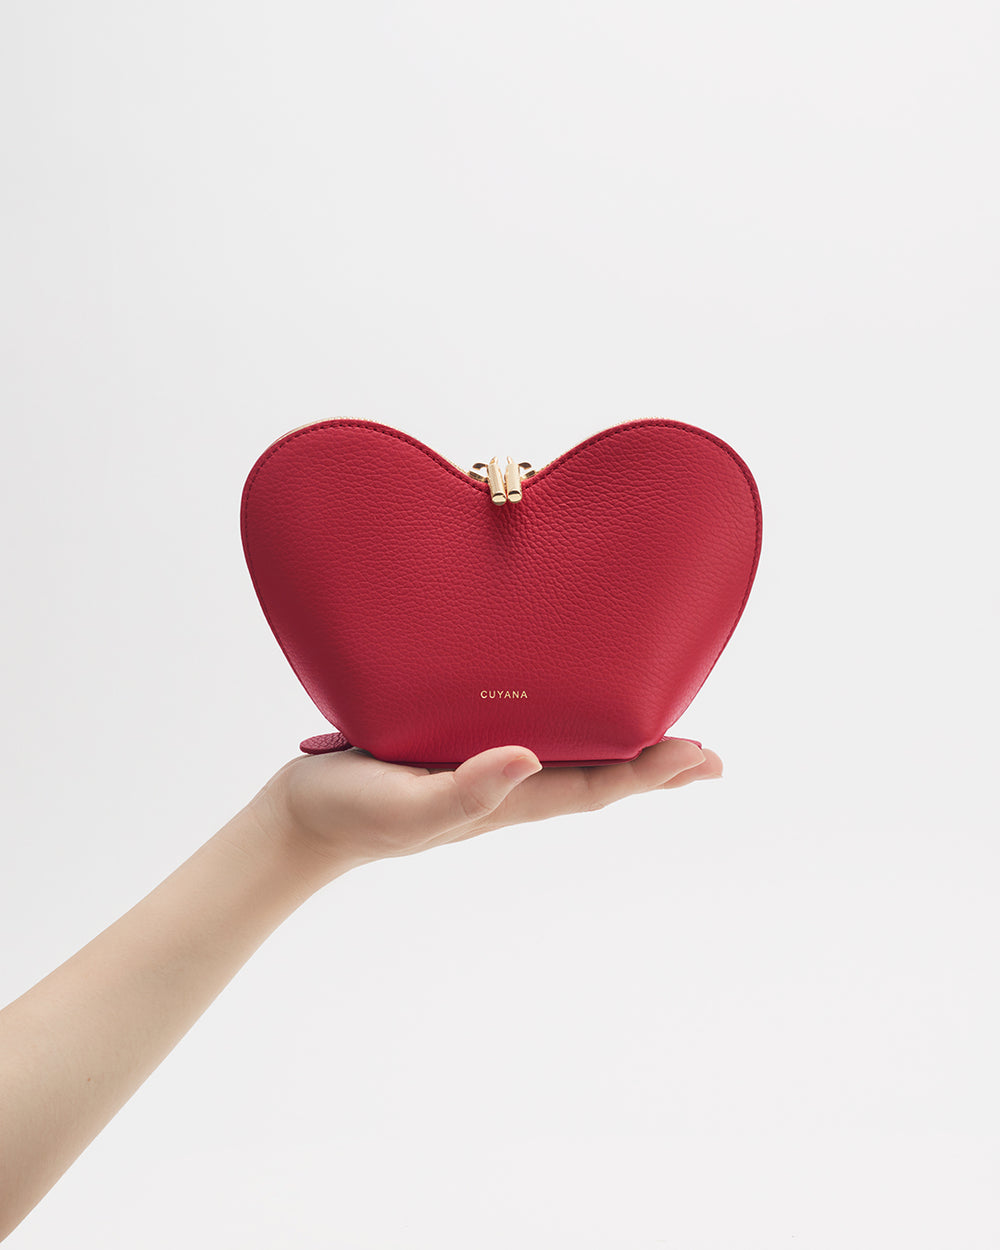 Hand holding a heart-shaped purse against a plain background.